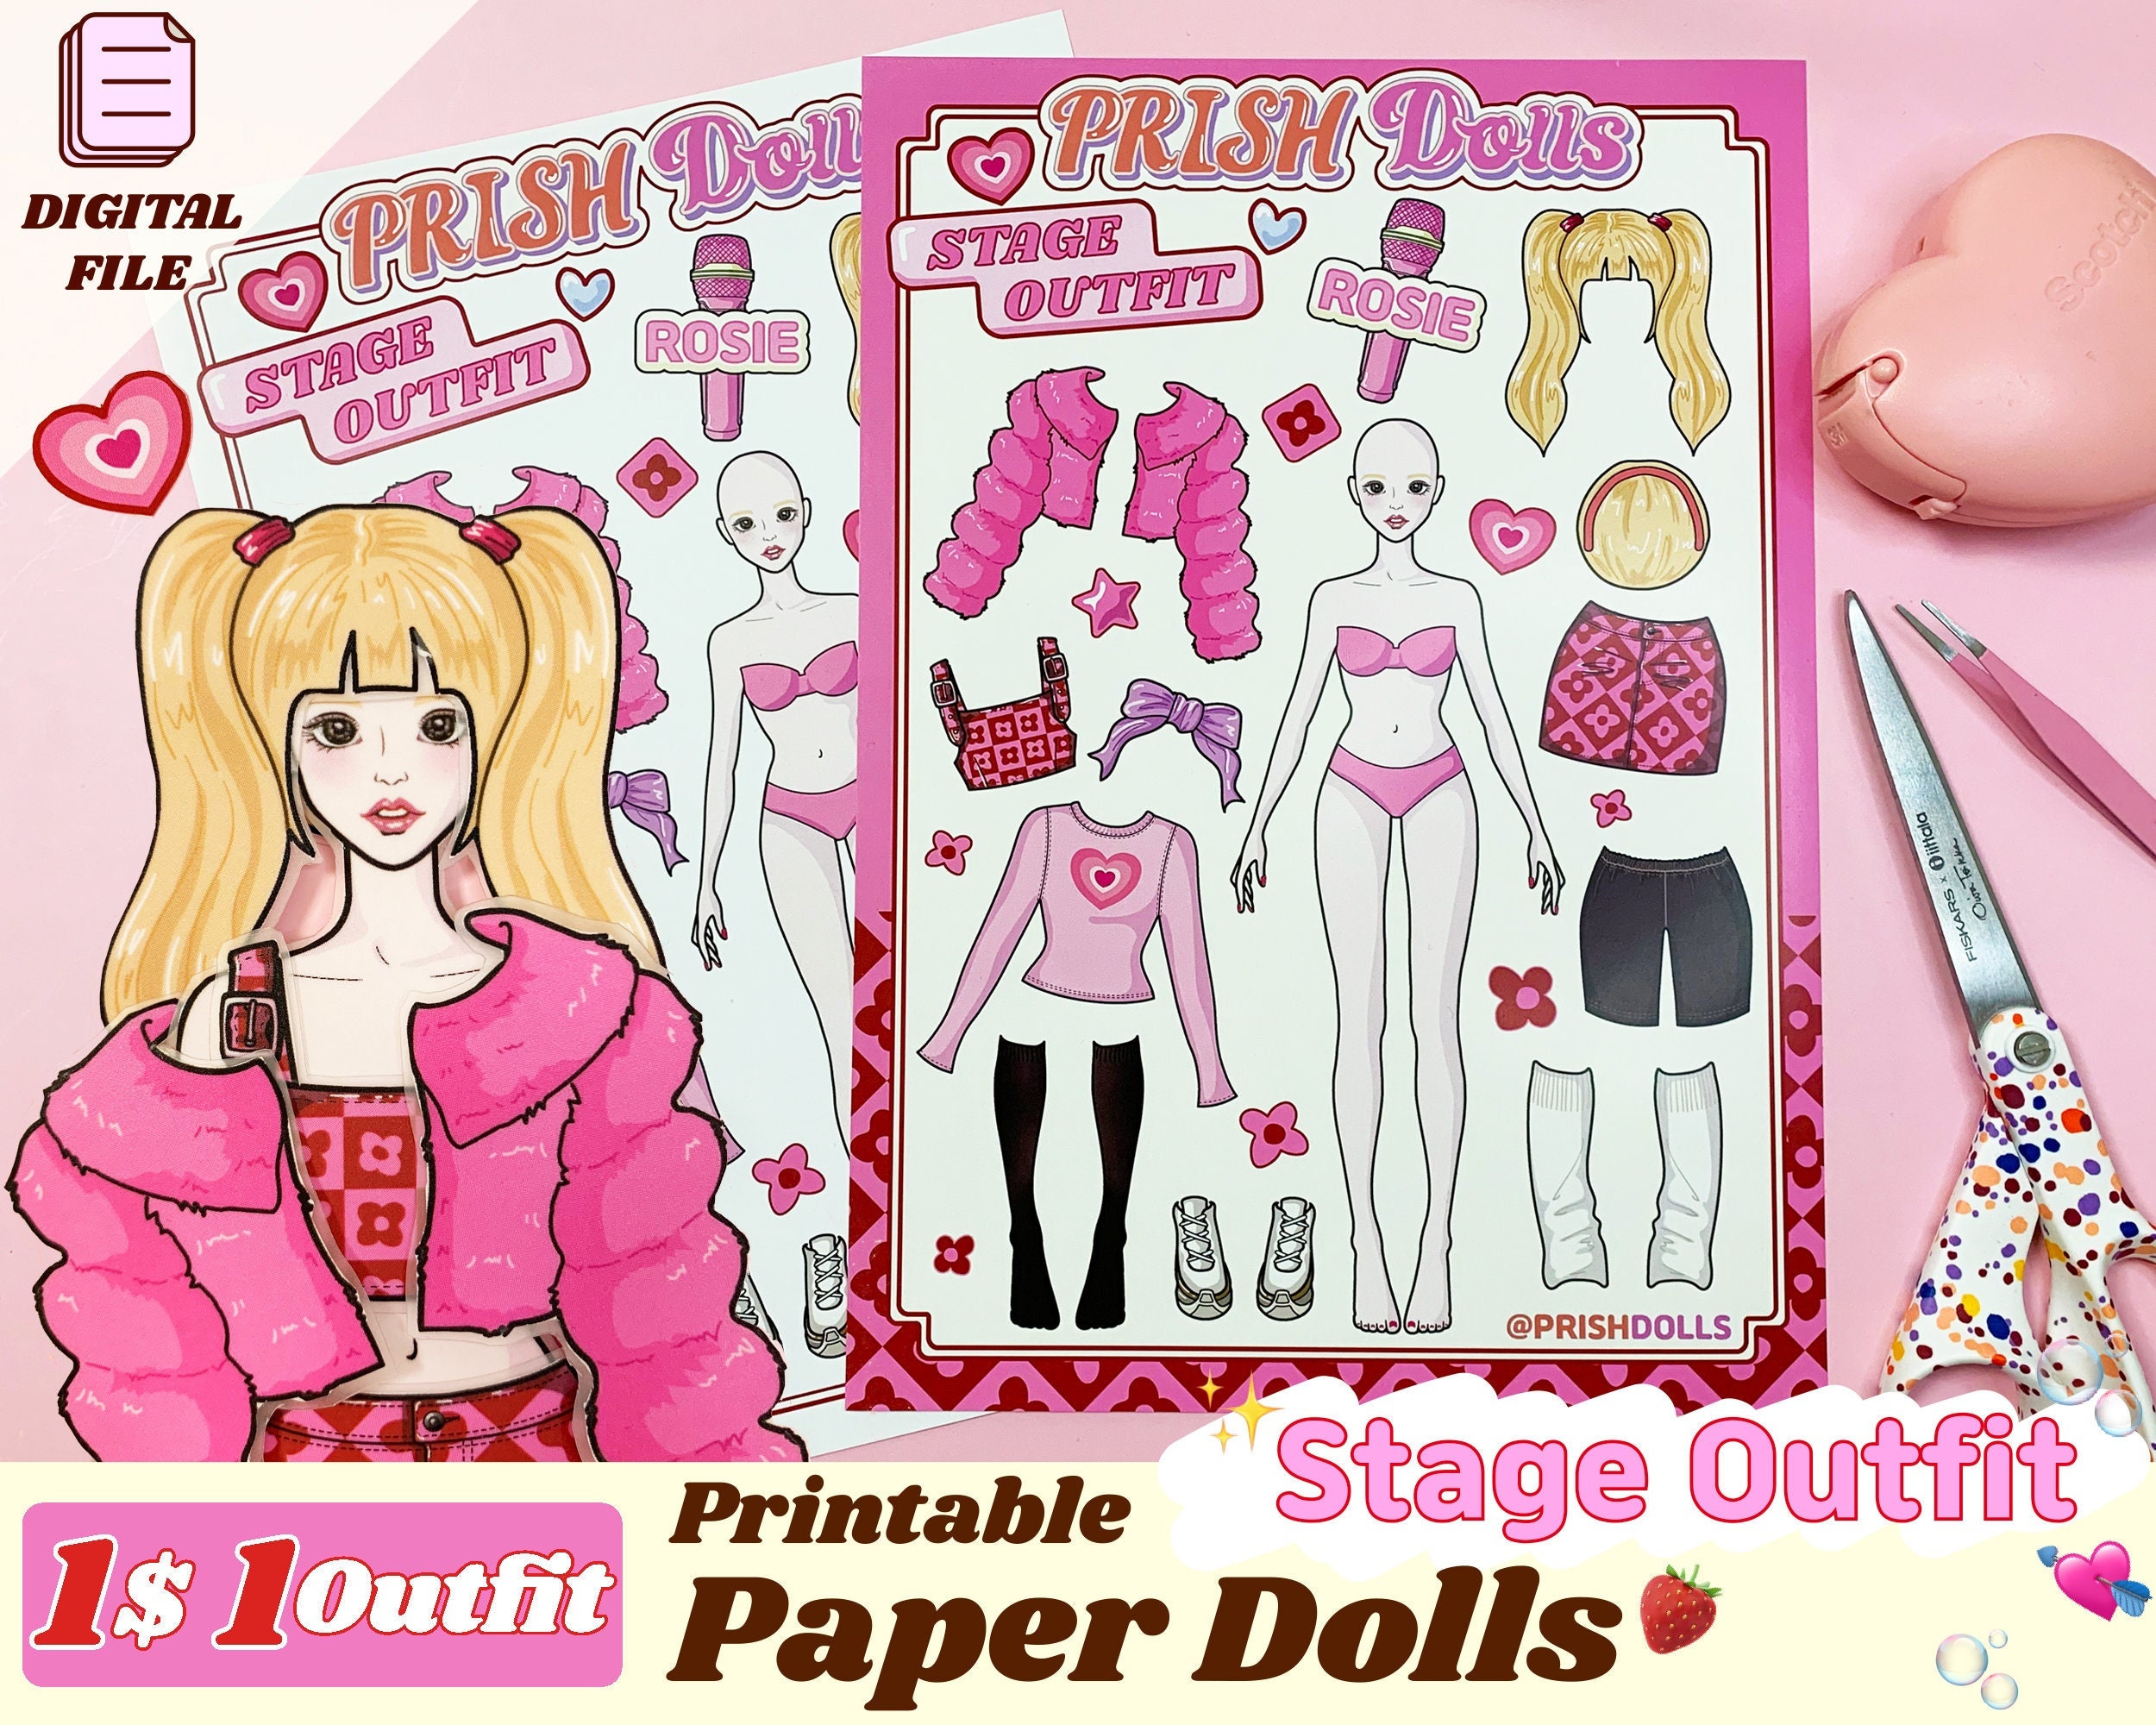 Cut Out Paper Dolls for Girls: 5 Fashion Activity Book for Girls Ages 8 -12  With Clothes & Dress Up